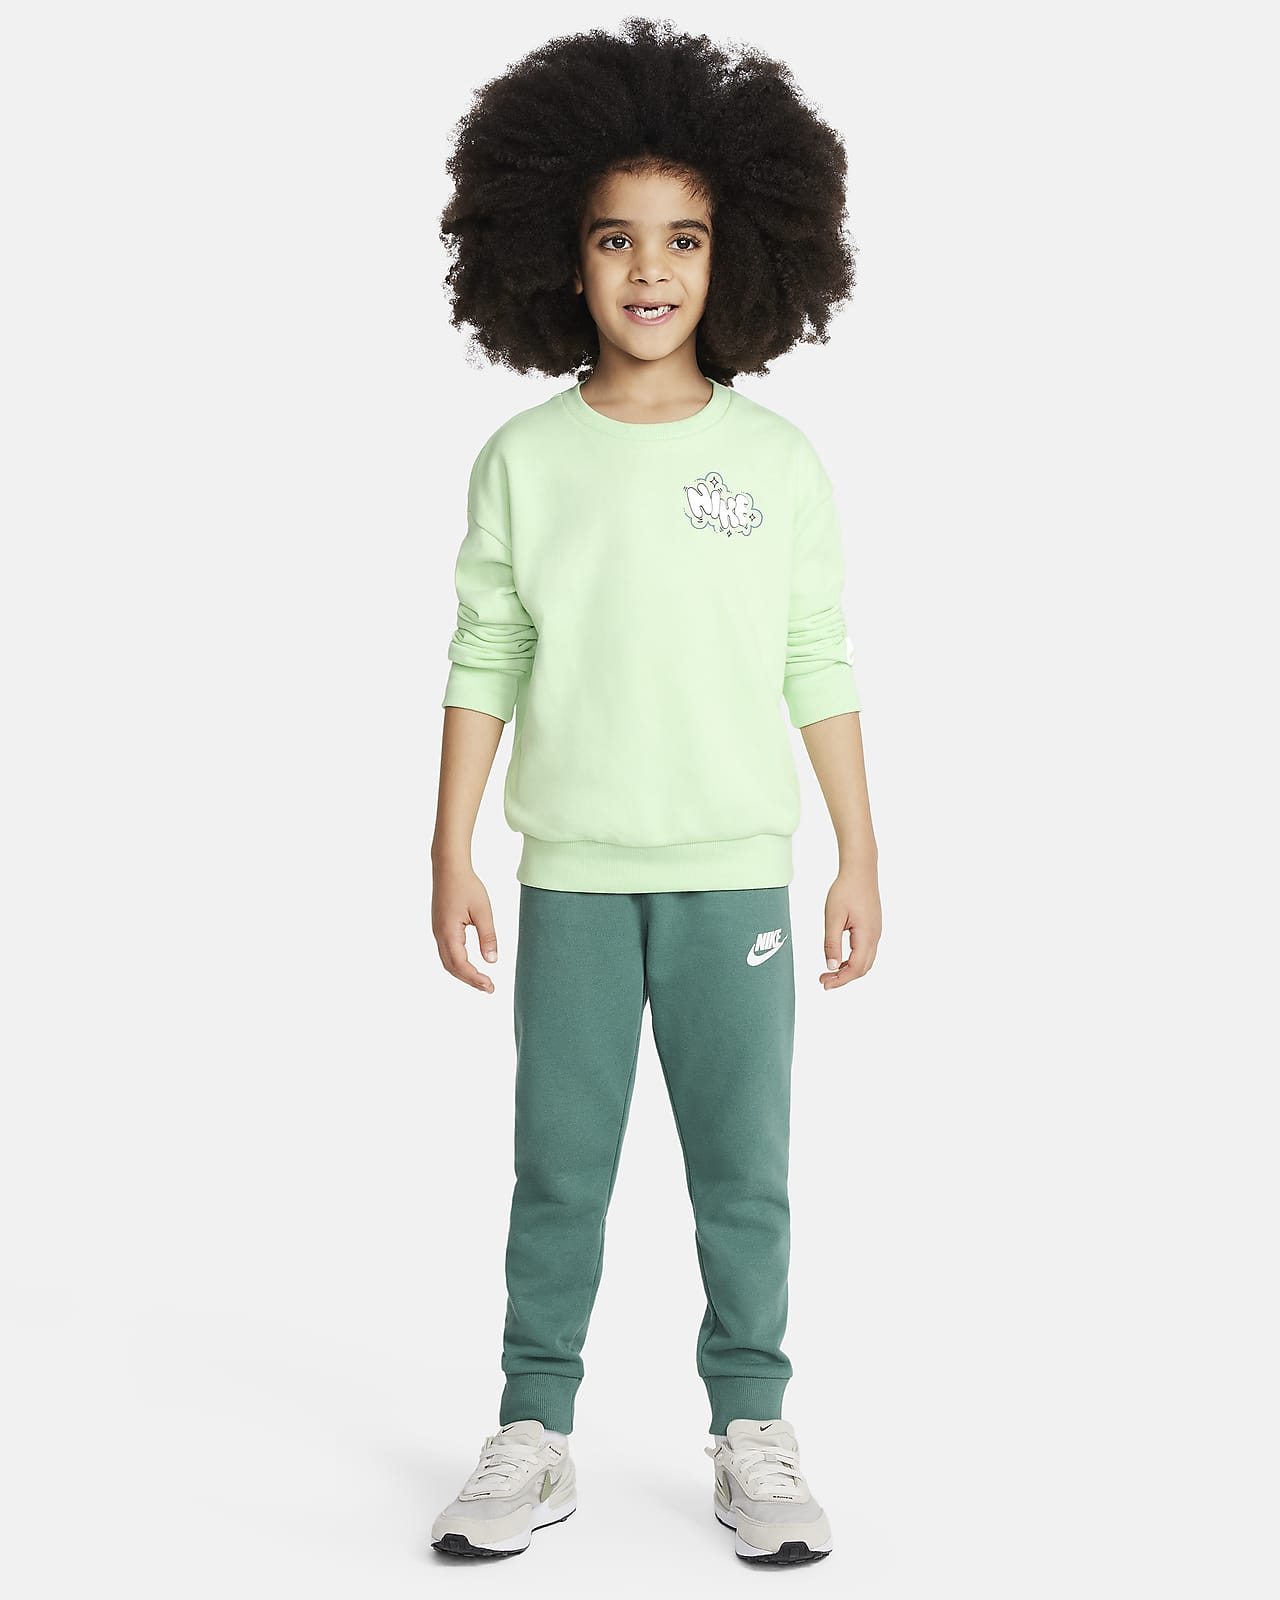 Nike Sportswear Create Your Own Adventure Little Kids' French Terry Graphic Crew Set